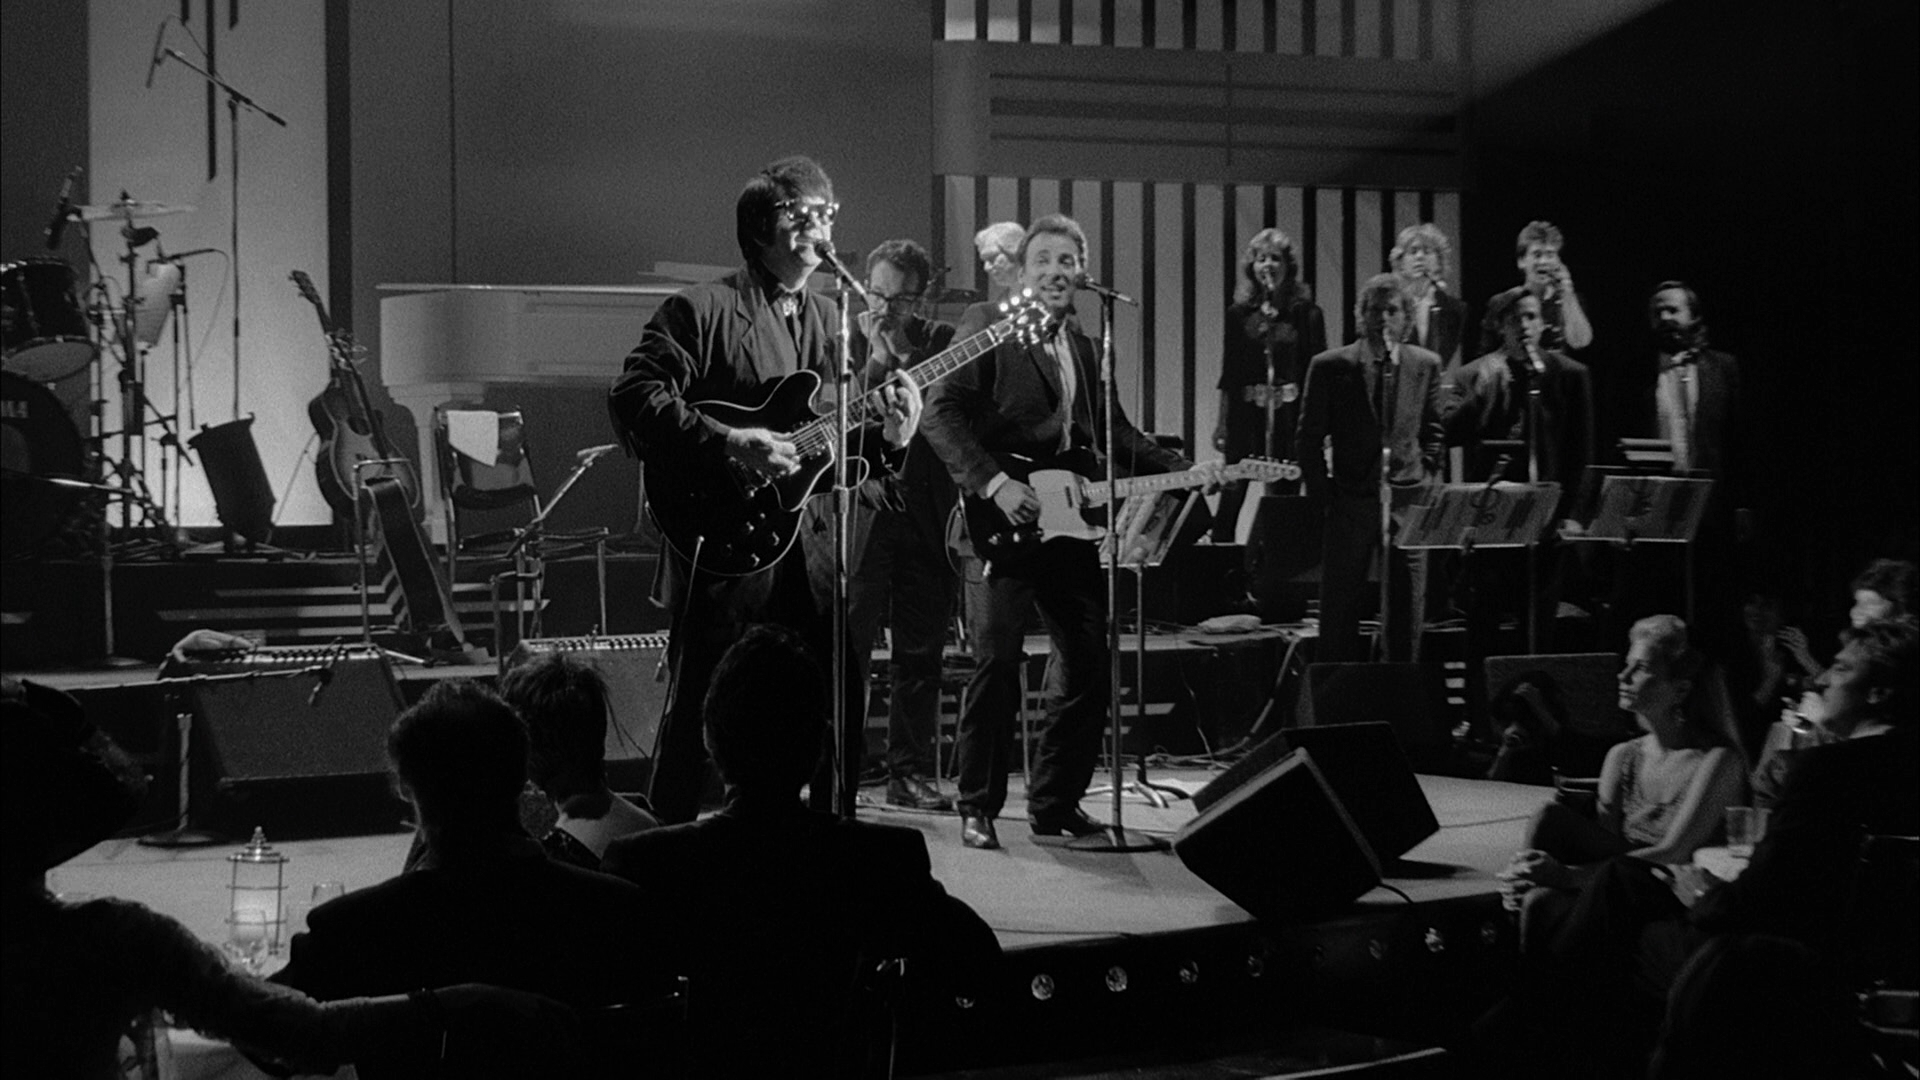 00000.m2ts(ROY_ORBISON_BW_NIGHT_30)_20180121_120445.288.png